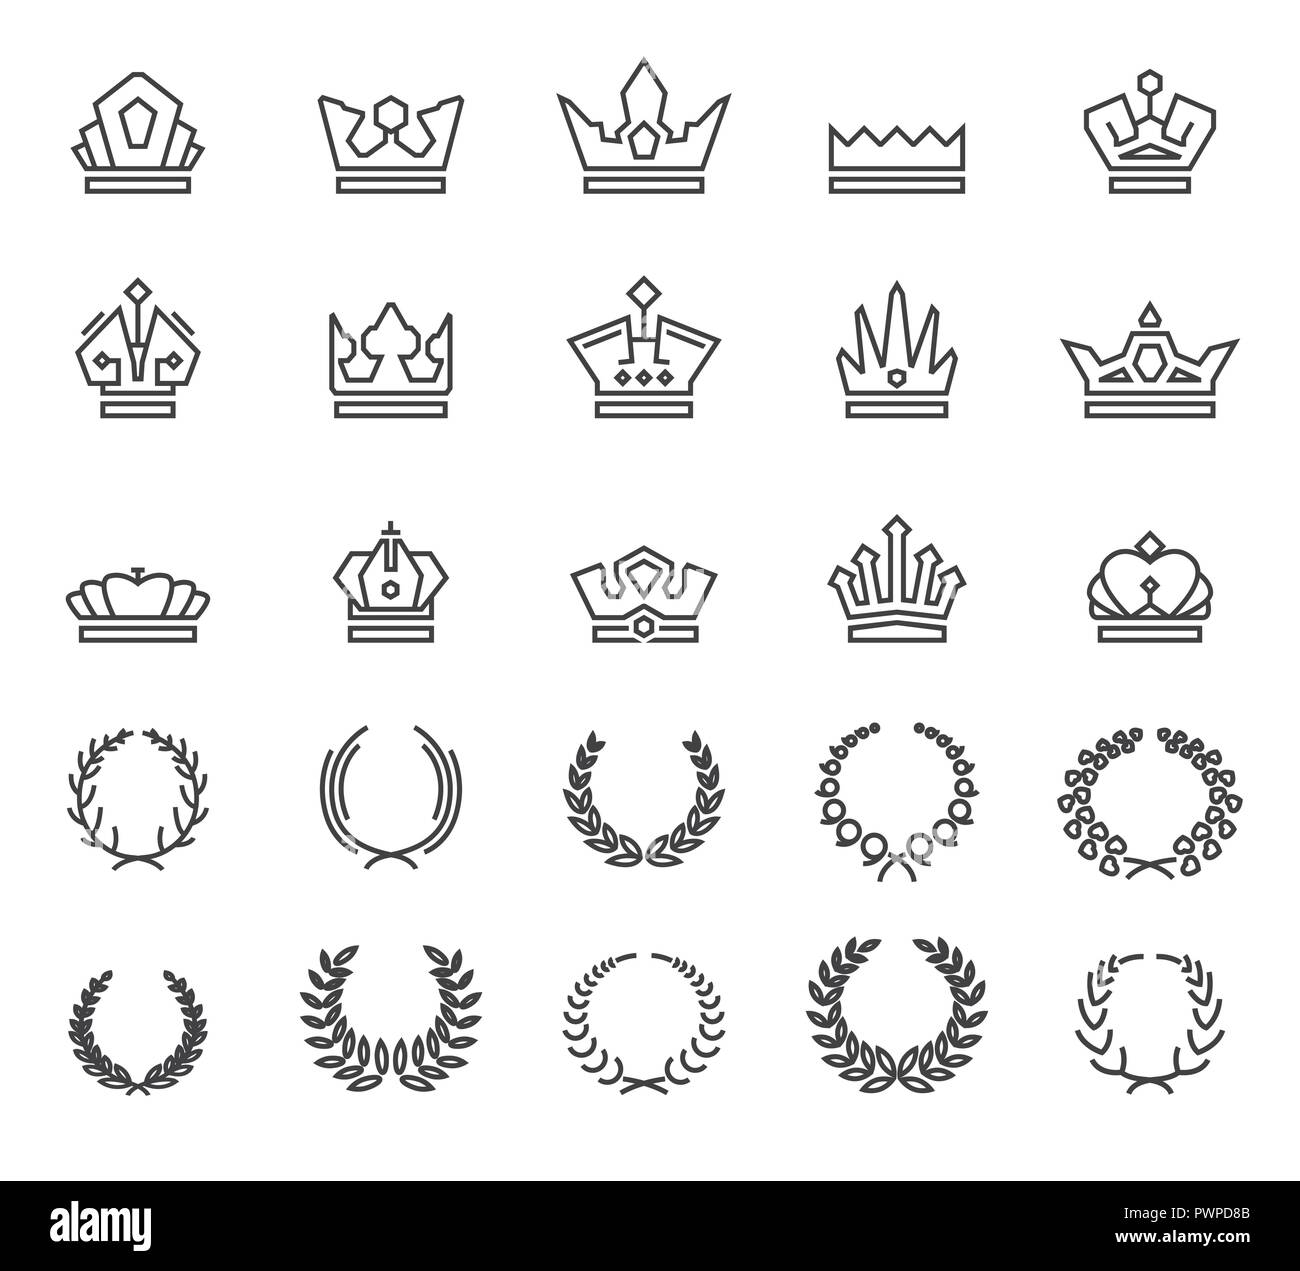 Icons wreaths and crowns vector illustration for your design Stock Vector